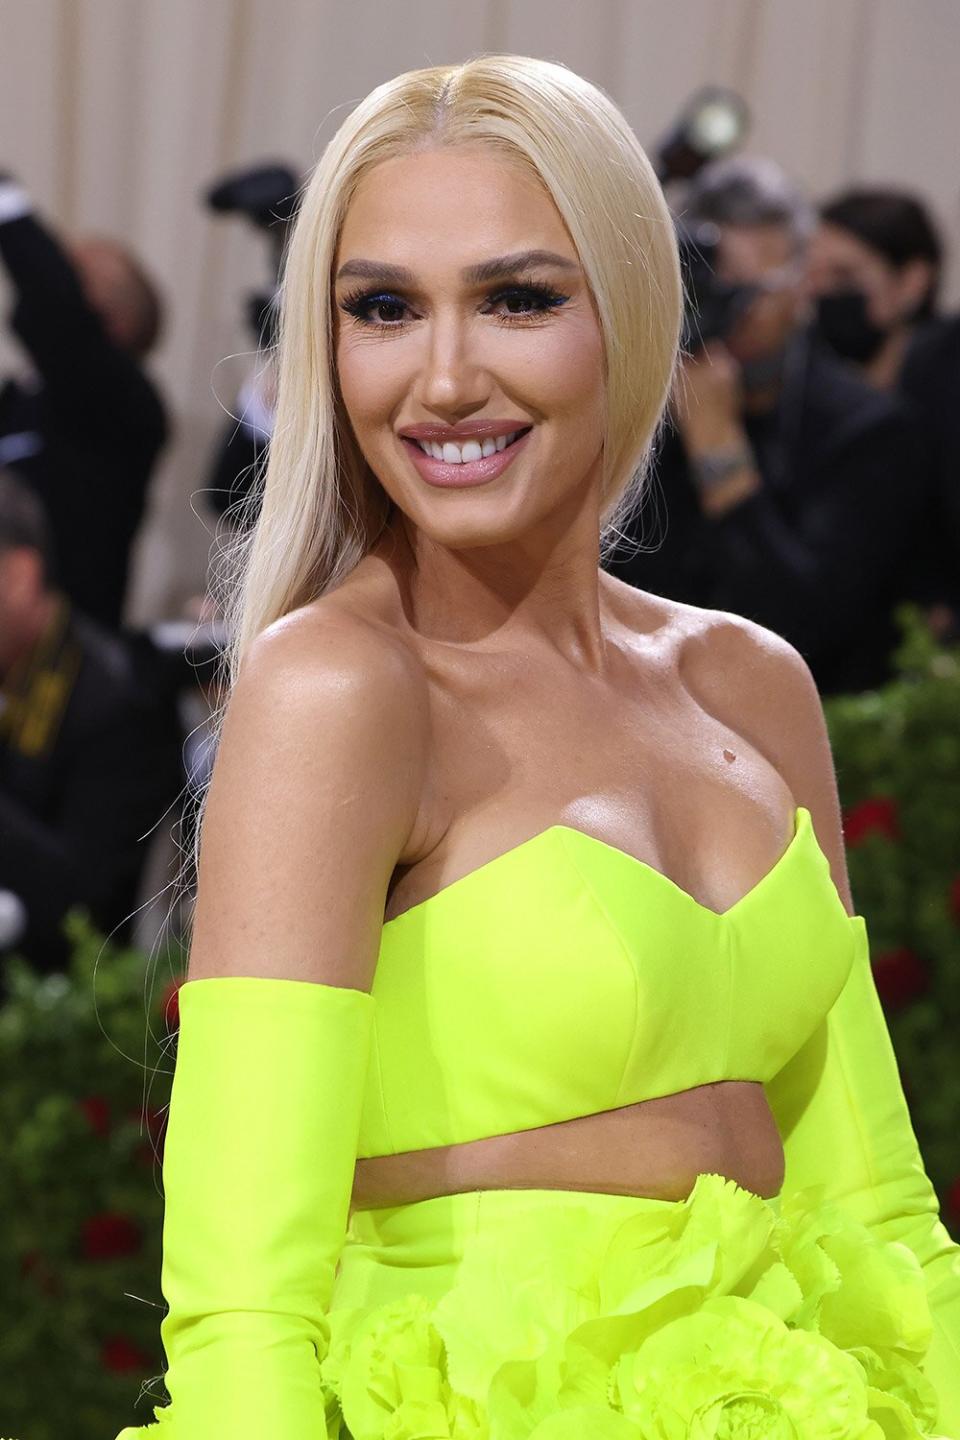 NEW YORK, NEW YORK - MAY 02: Gwen Stefani attends The 2022 Met Gala Celebrating "In America: An Anthology of Fashion" at The Metropolitan Museum of Art on May 02, 2022 in New York City. (Photo by Theo Wargo/WireImage)